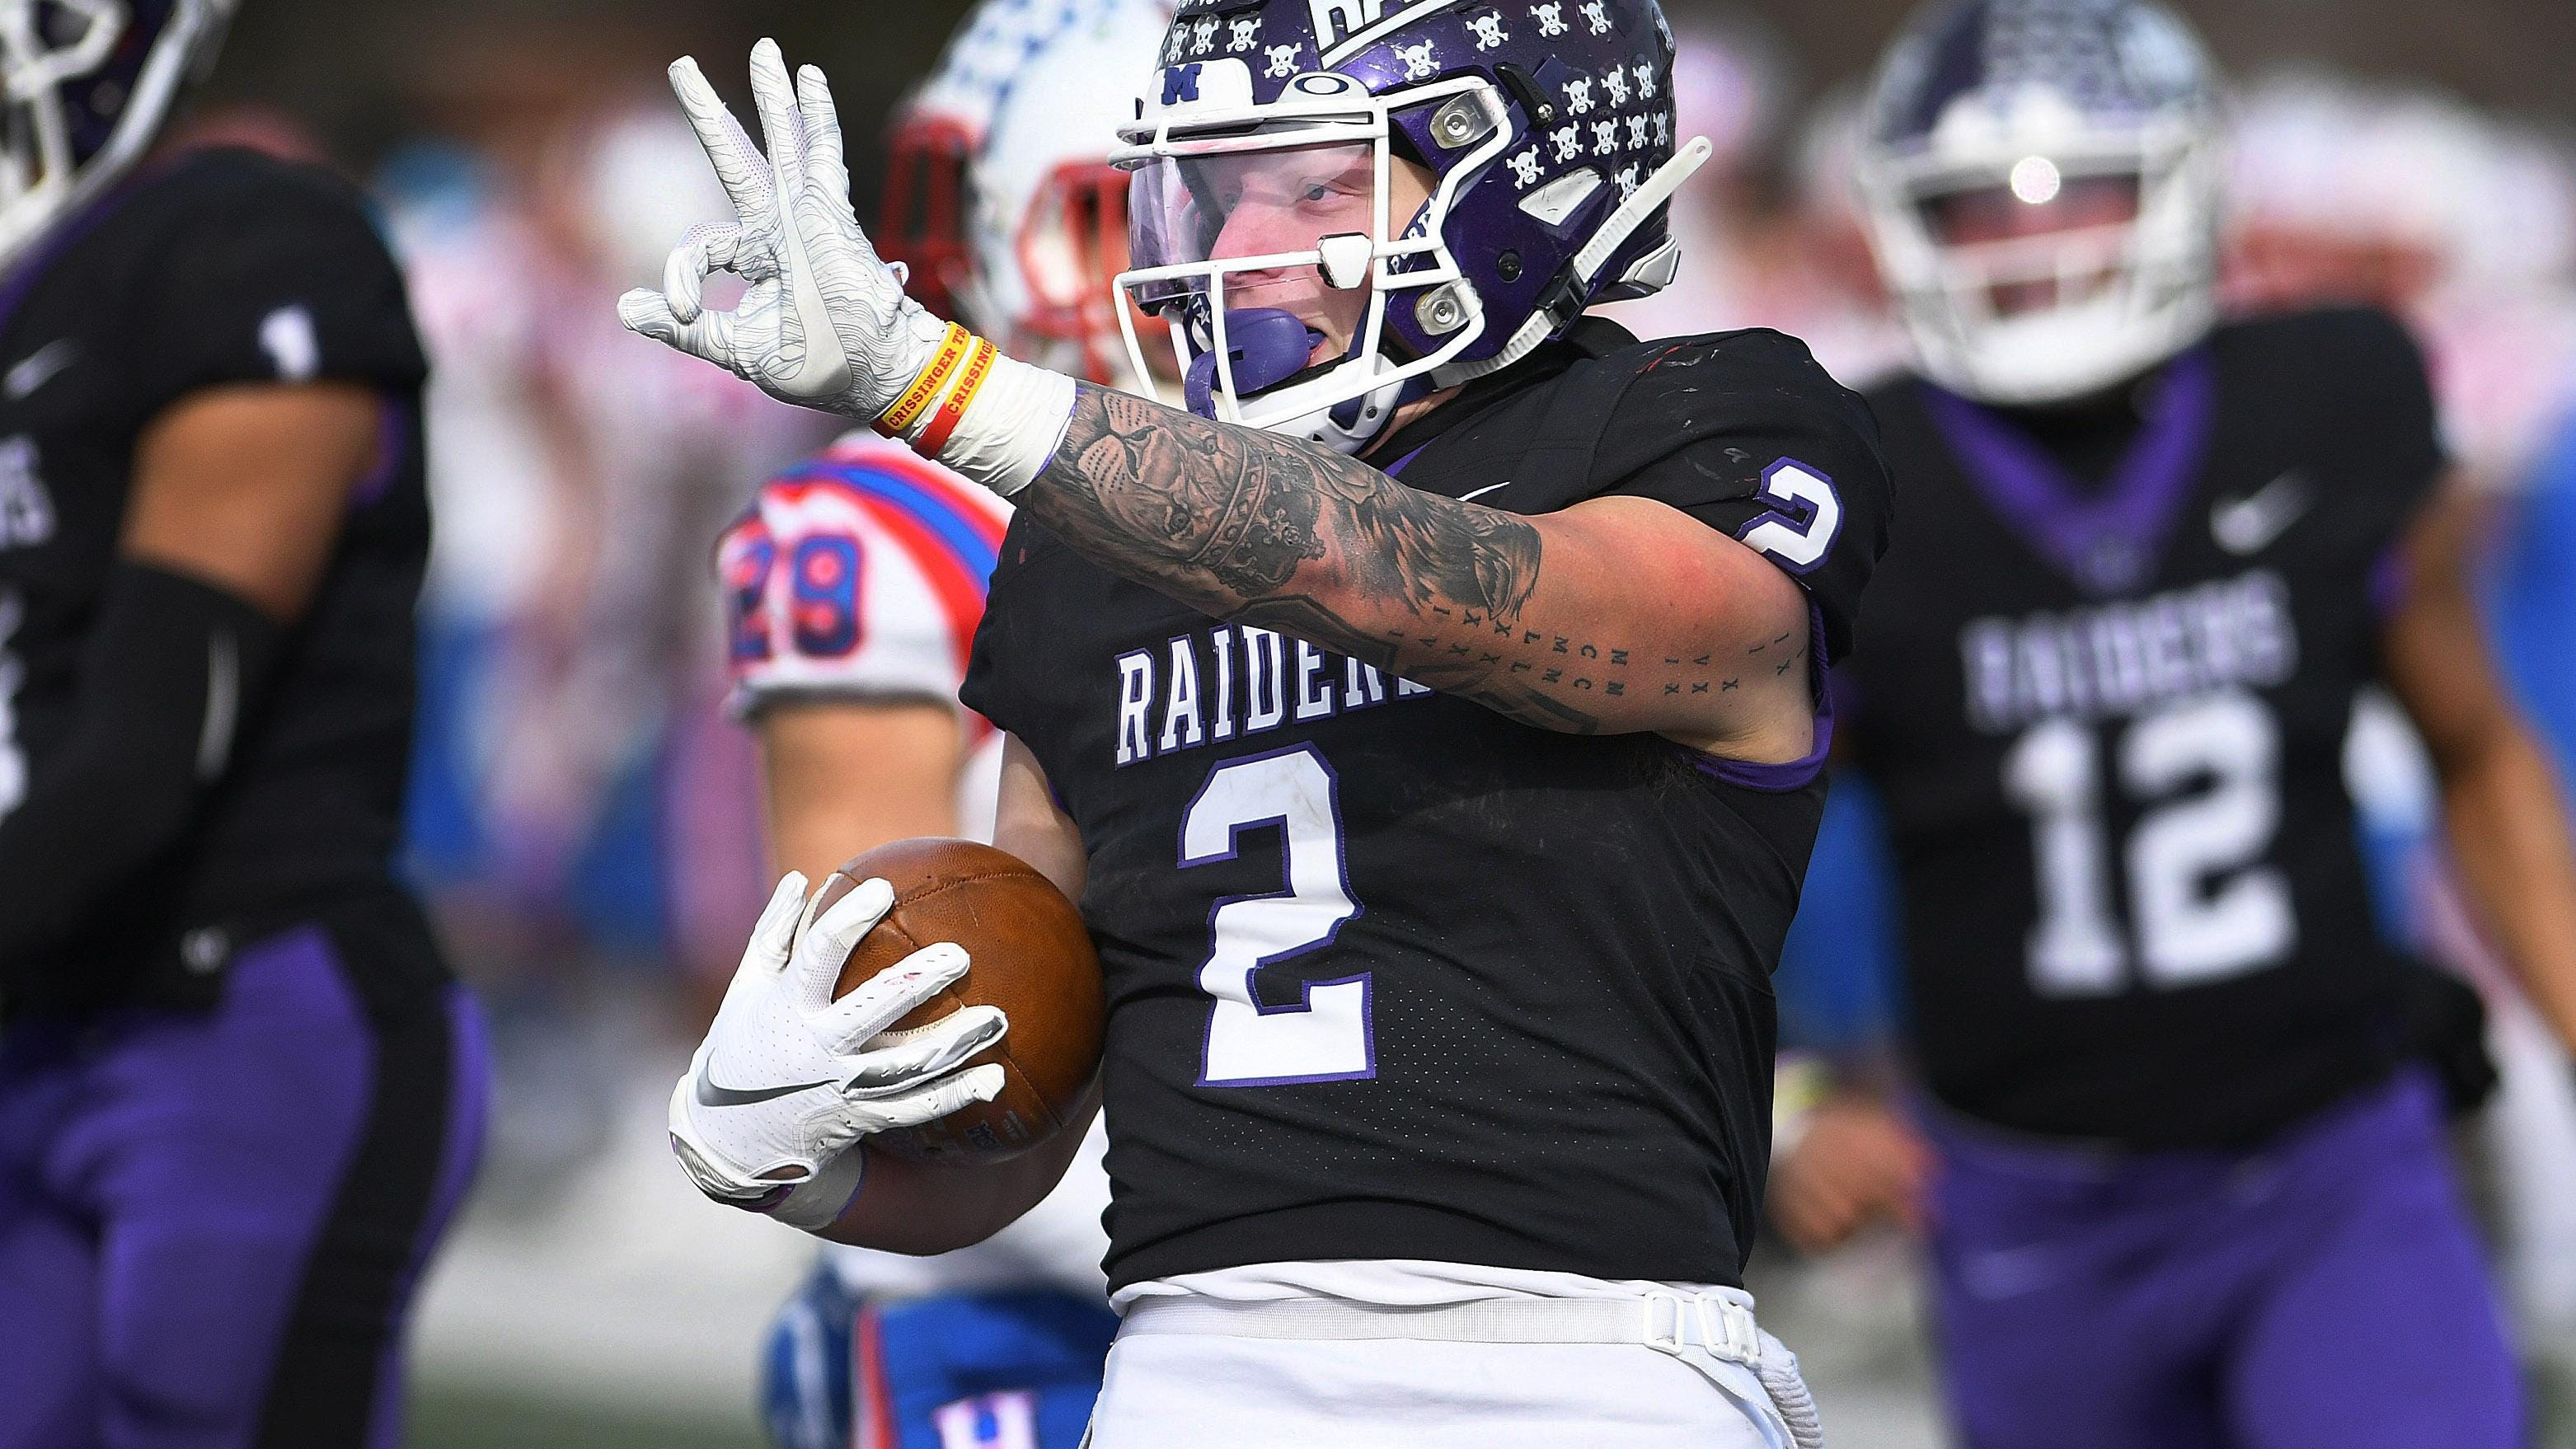 Mount Union football begins practice, spring season opener scheduled for March 12